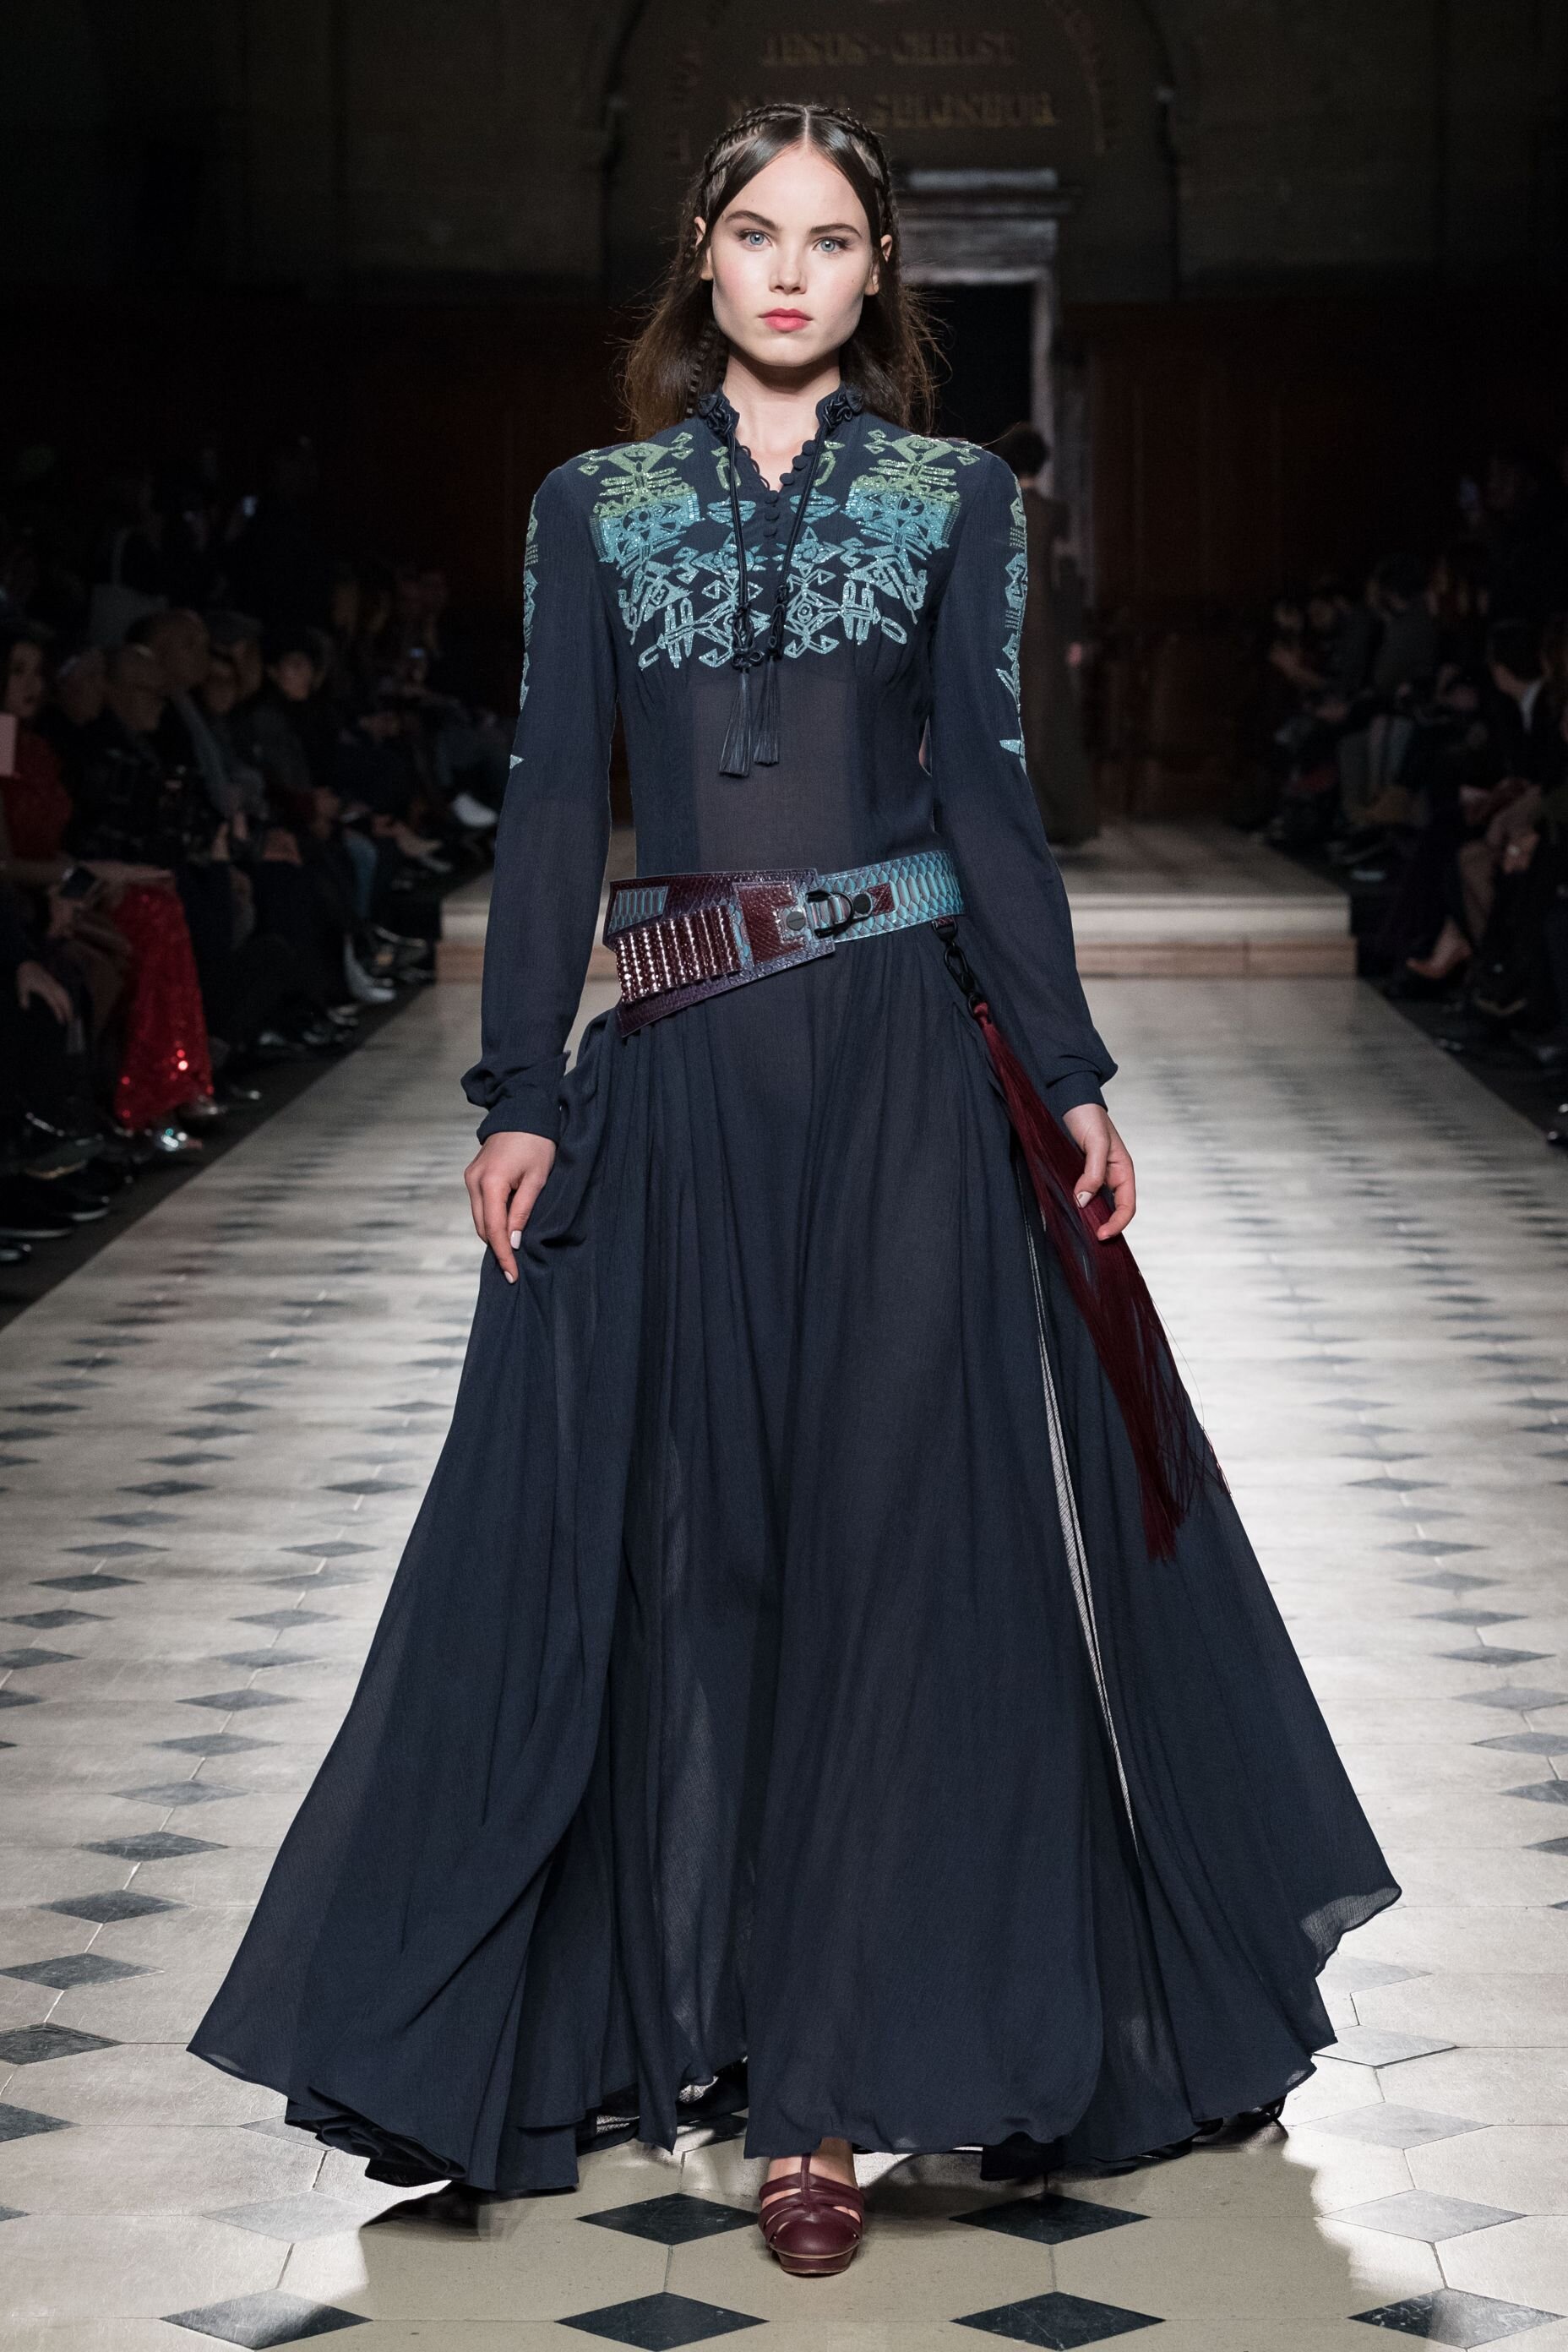 Spring 2020 Haute Couture: Julien Fournié's First Conquests ...